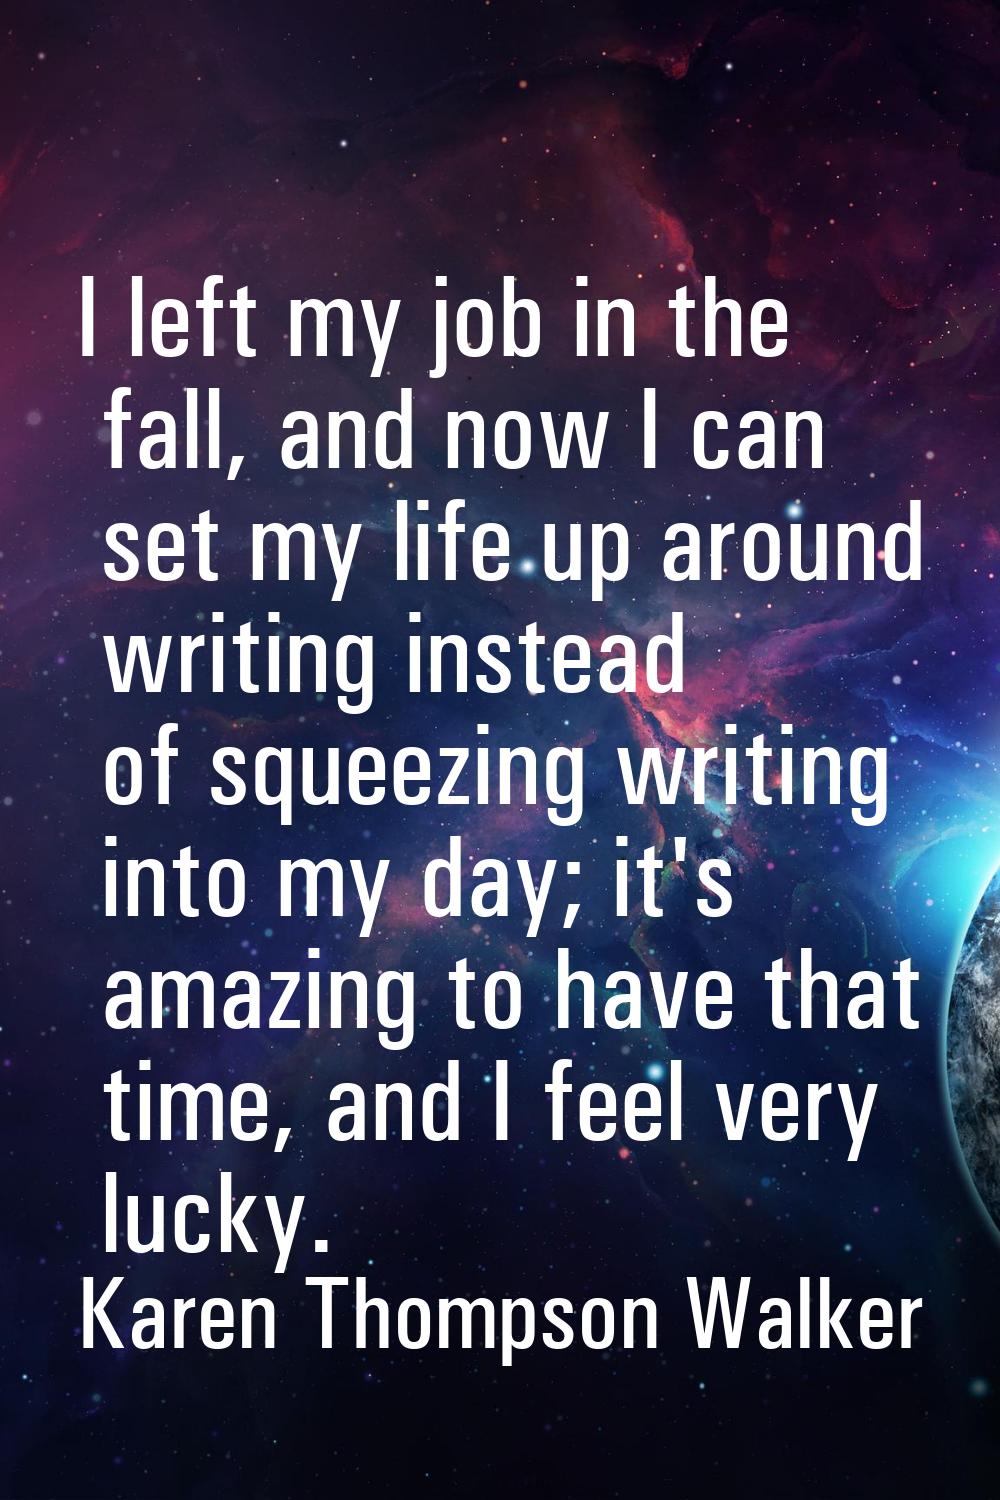 I left my job in the fall, and now I can set my life up around writing instead of squeezing writing